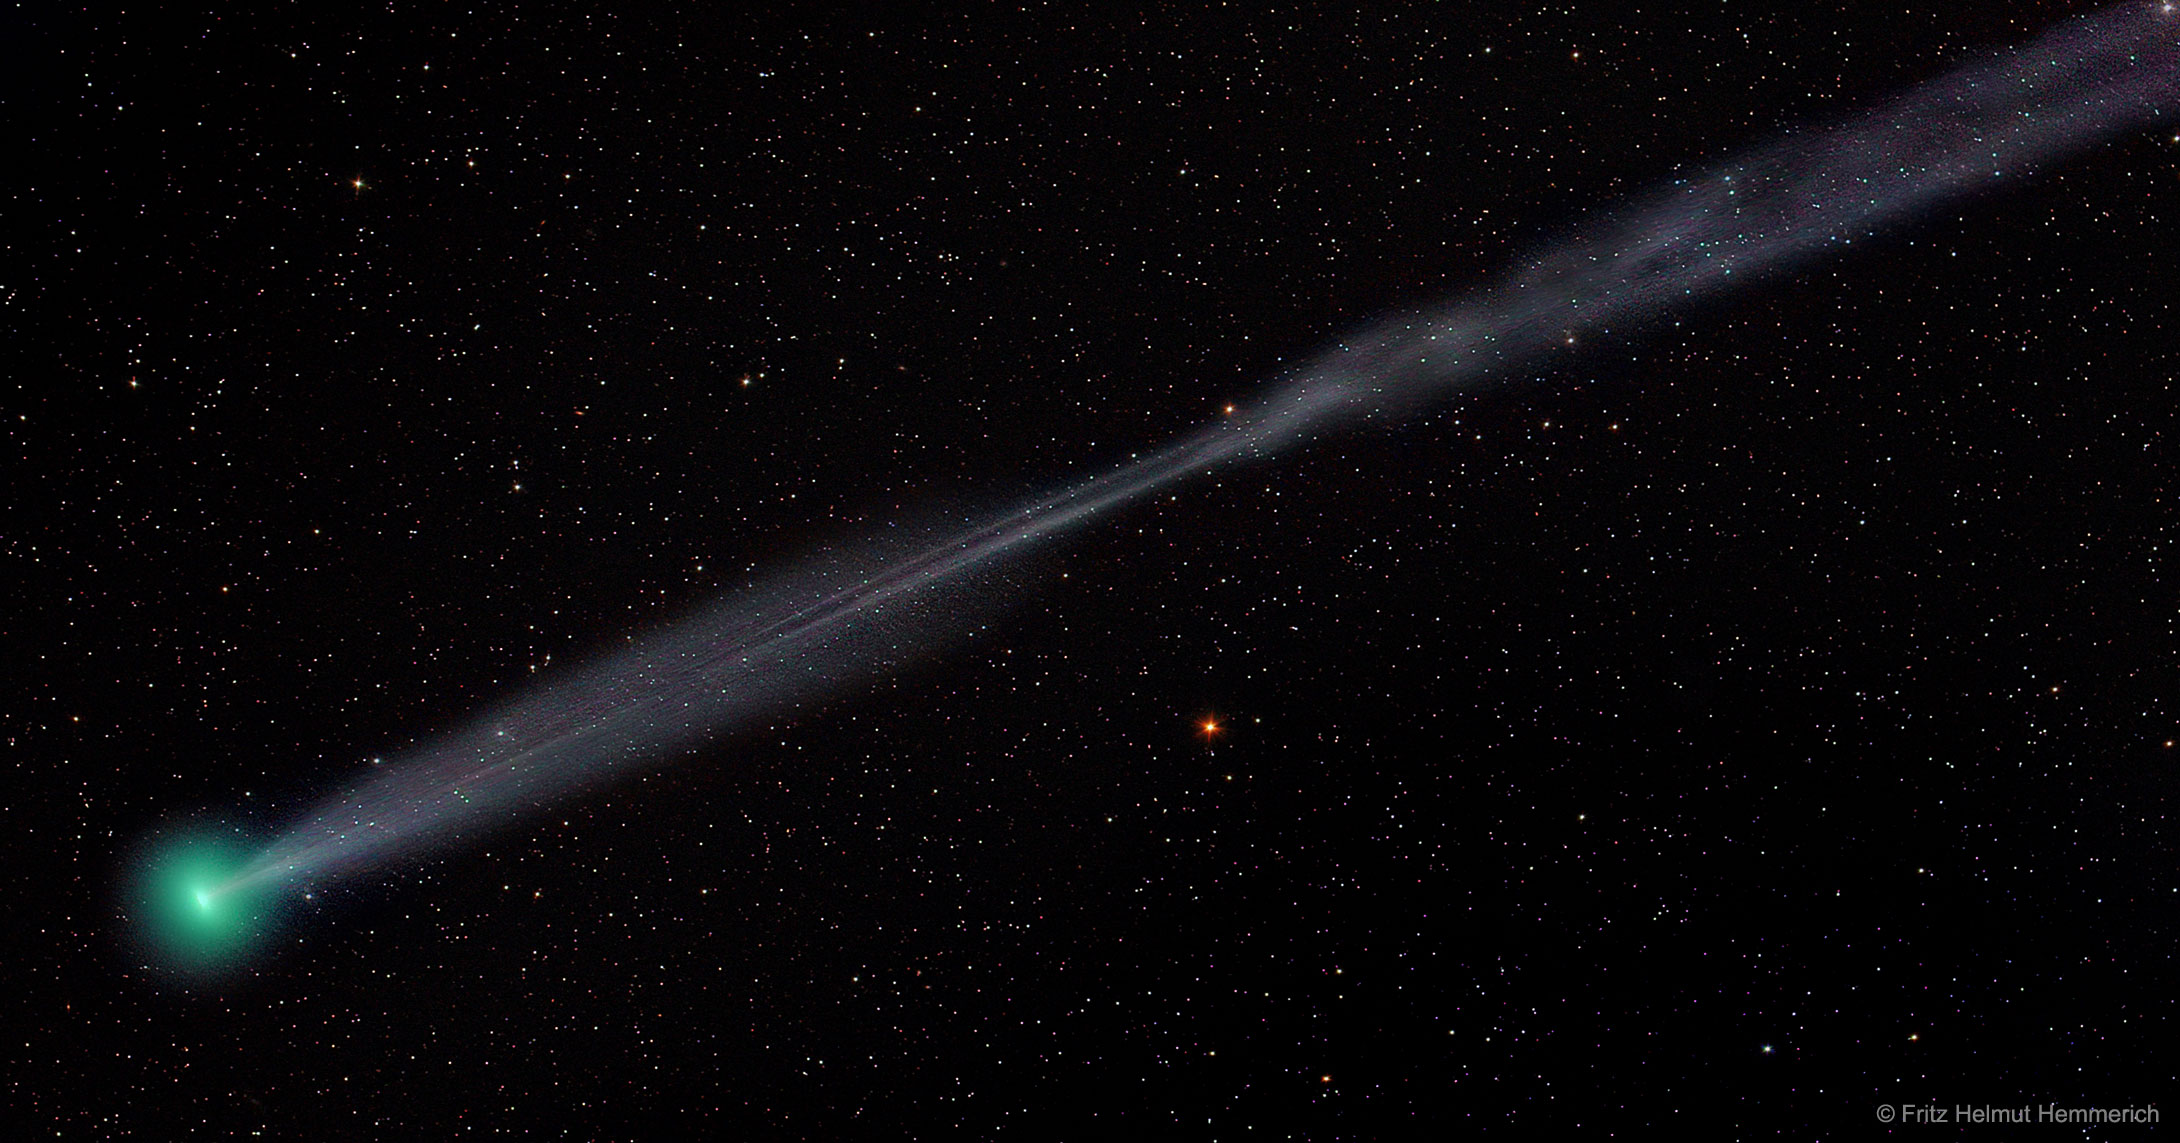 Astronomy Picture of the Day - Σελίδα 6 CometLovejoyE4_Hemmerich2_2180